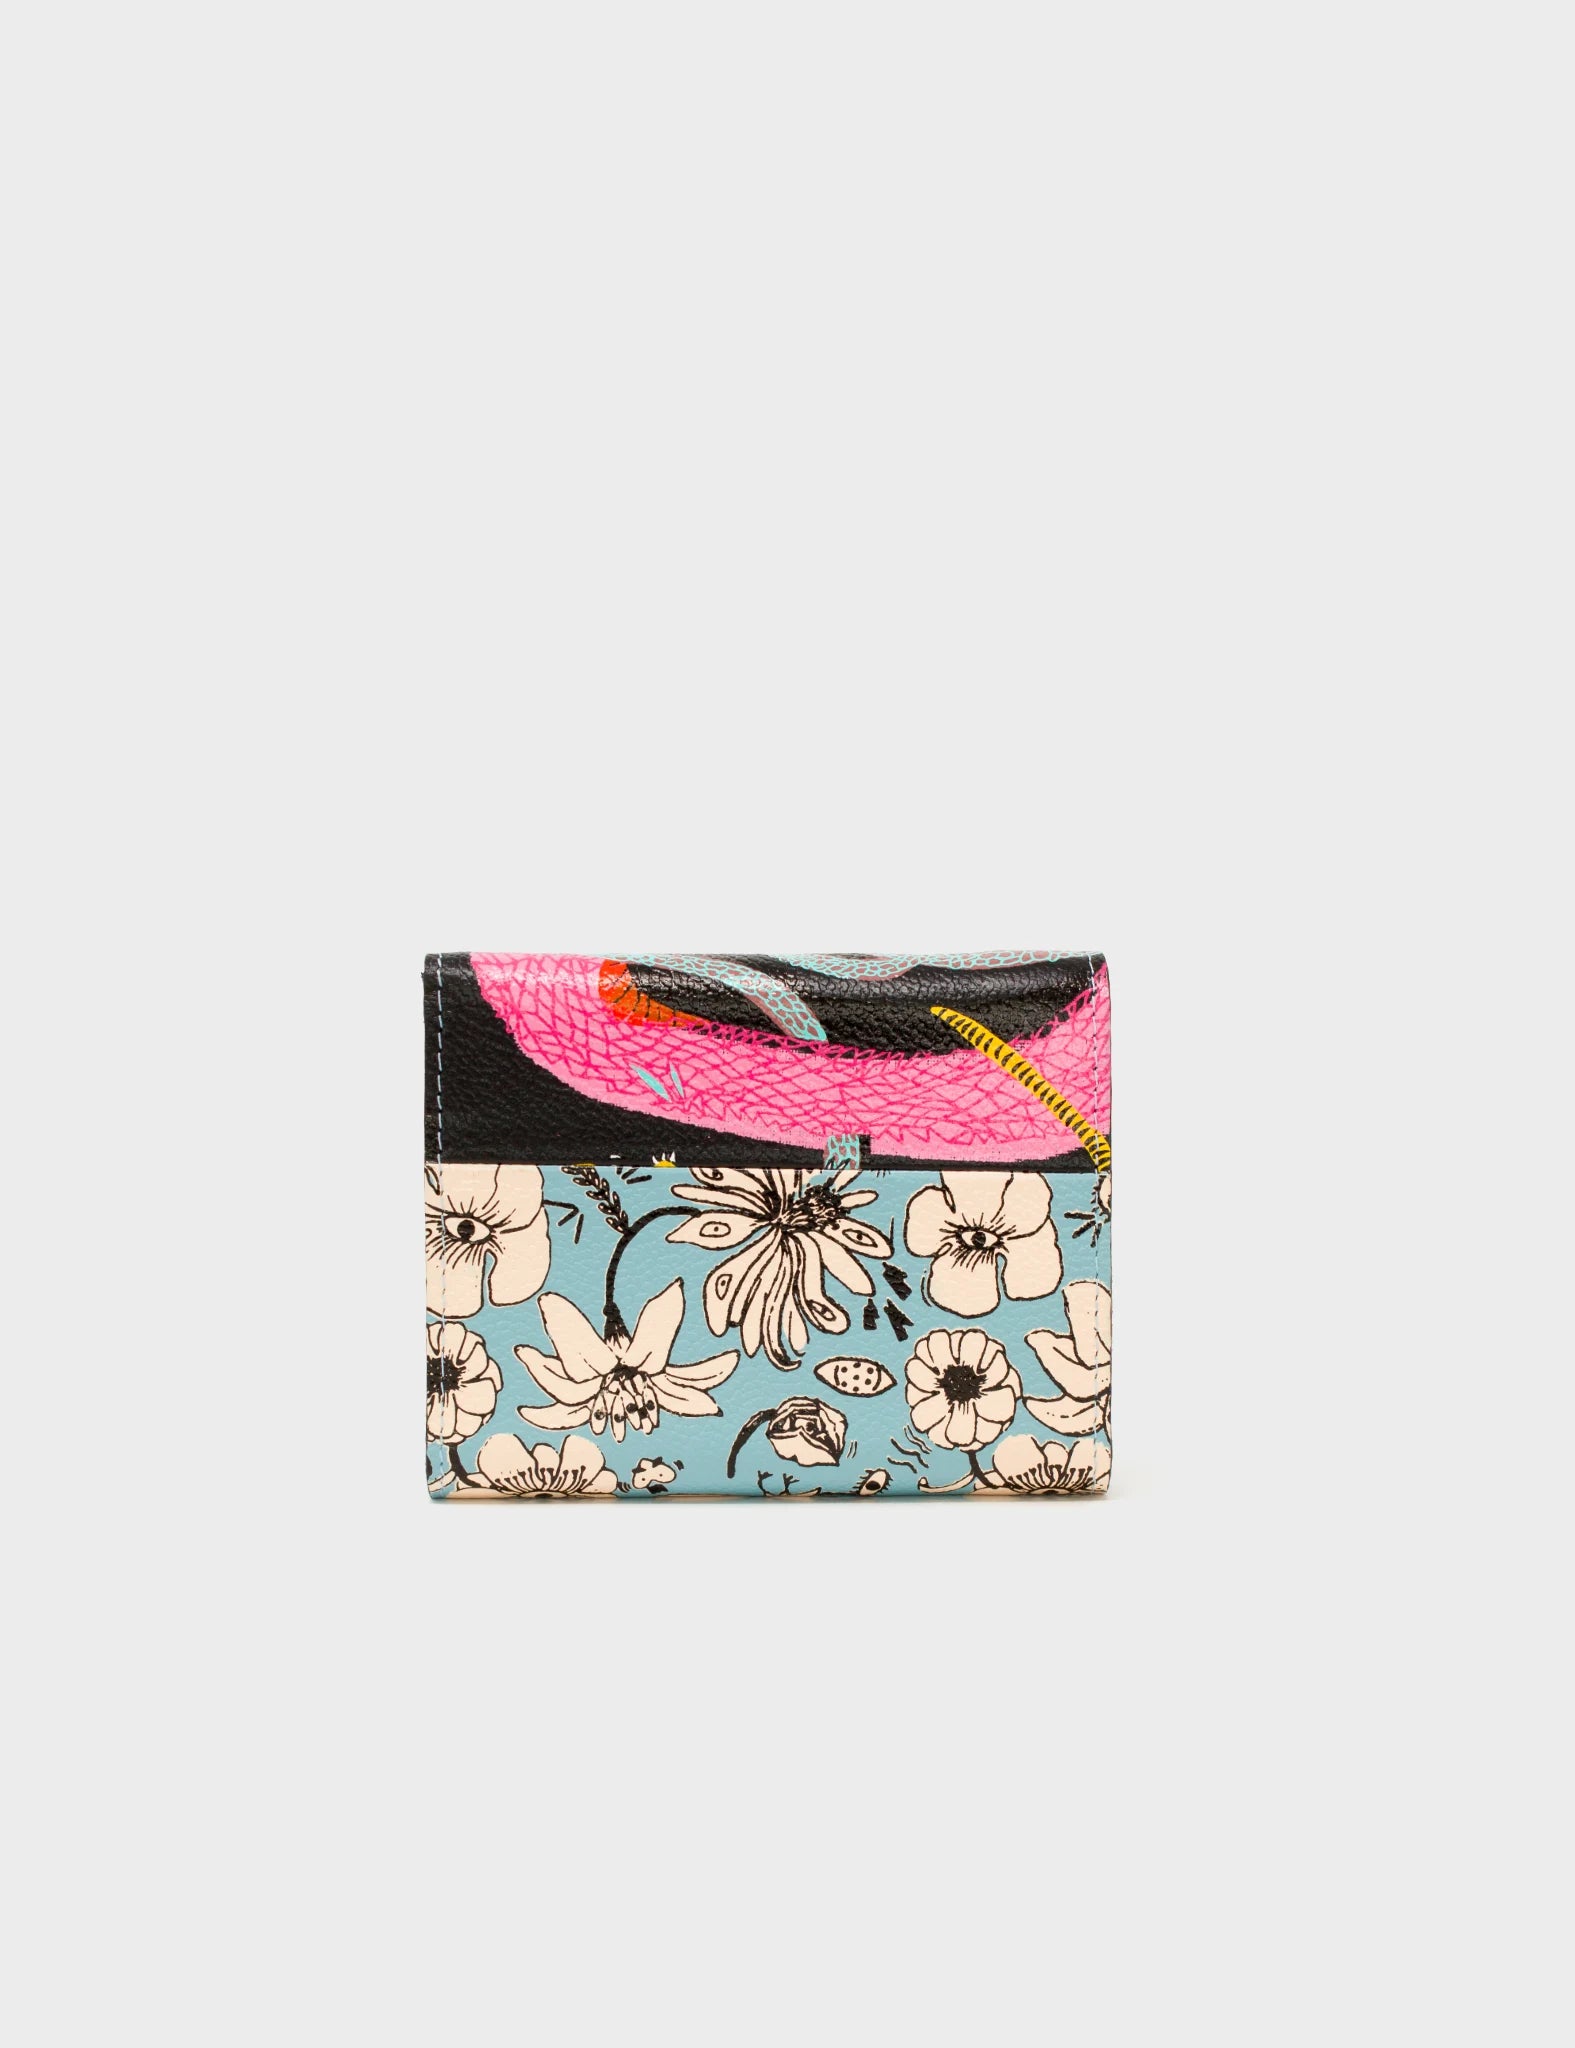 Cameo Blue Leather Wallet - Tangle, Snake and Flowers Print - Back 